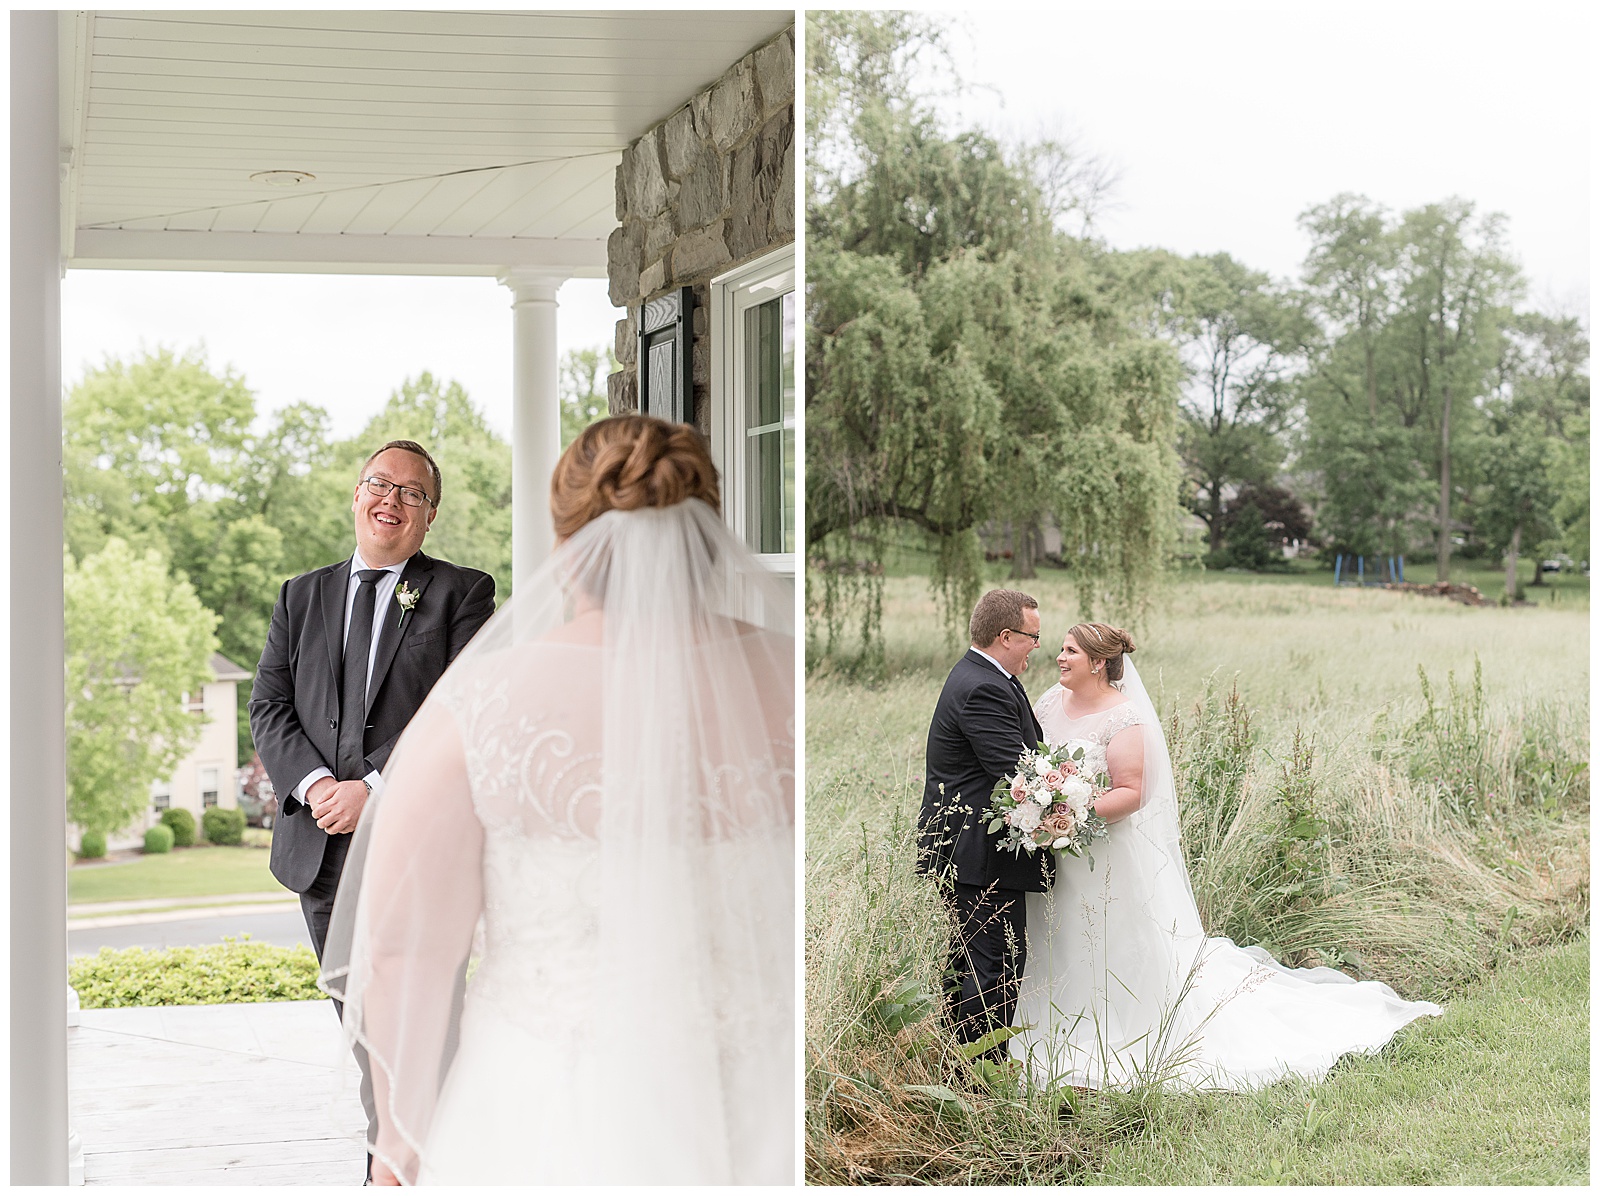 groom smiles as he sees his bride for the first time on their wedding day on front porch of lovely home